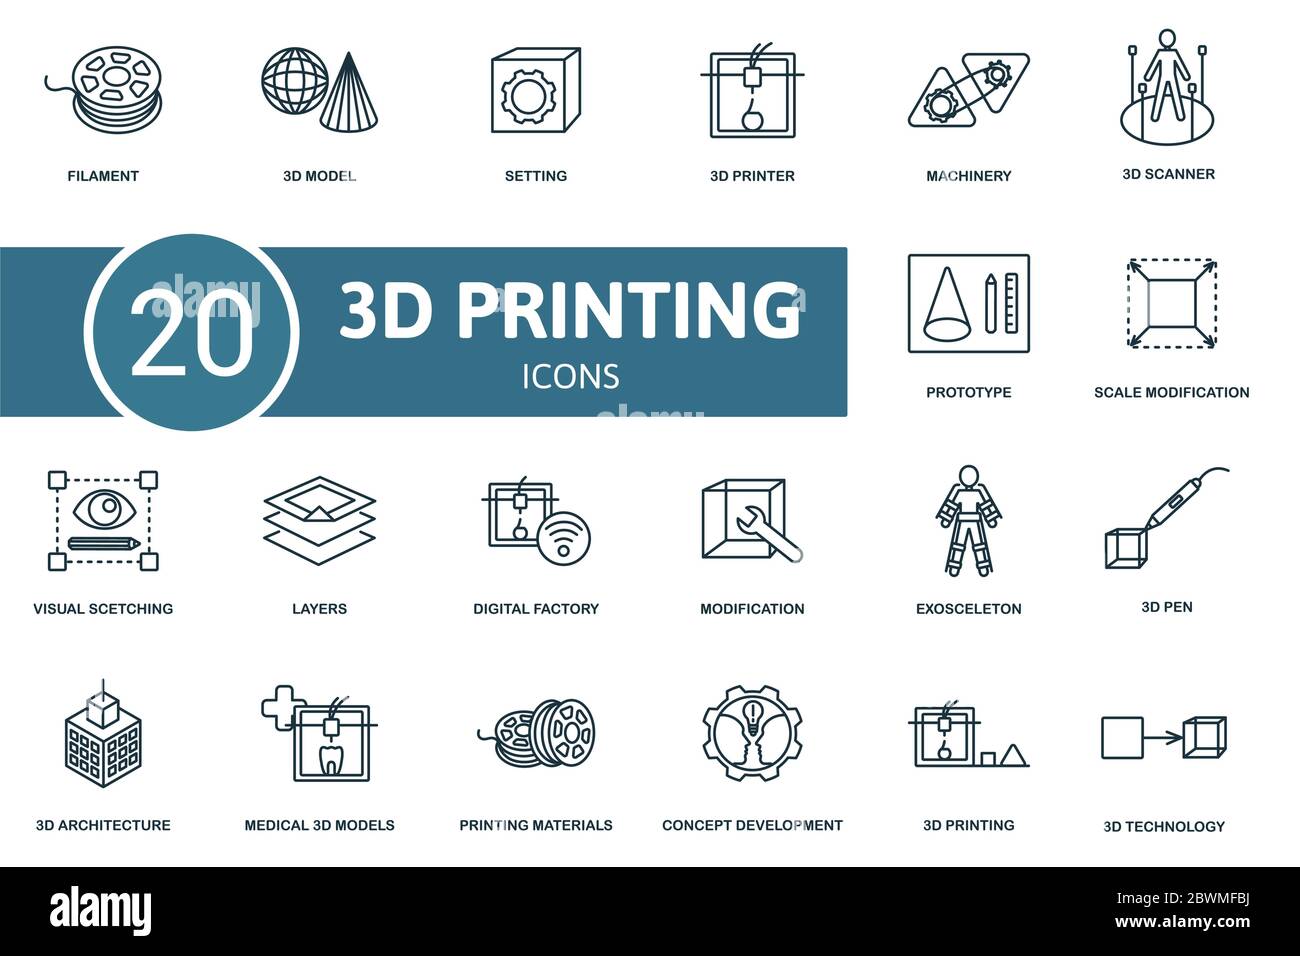 3D Printing icon set. Collection contain filament, model, setting, printer, machinery, scanner and over icons. 3D Printing elements set Stock Vector